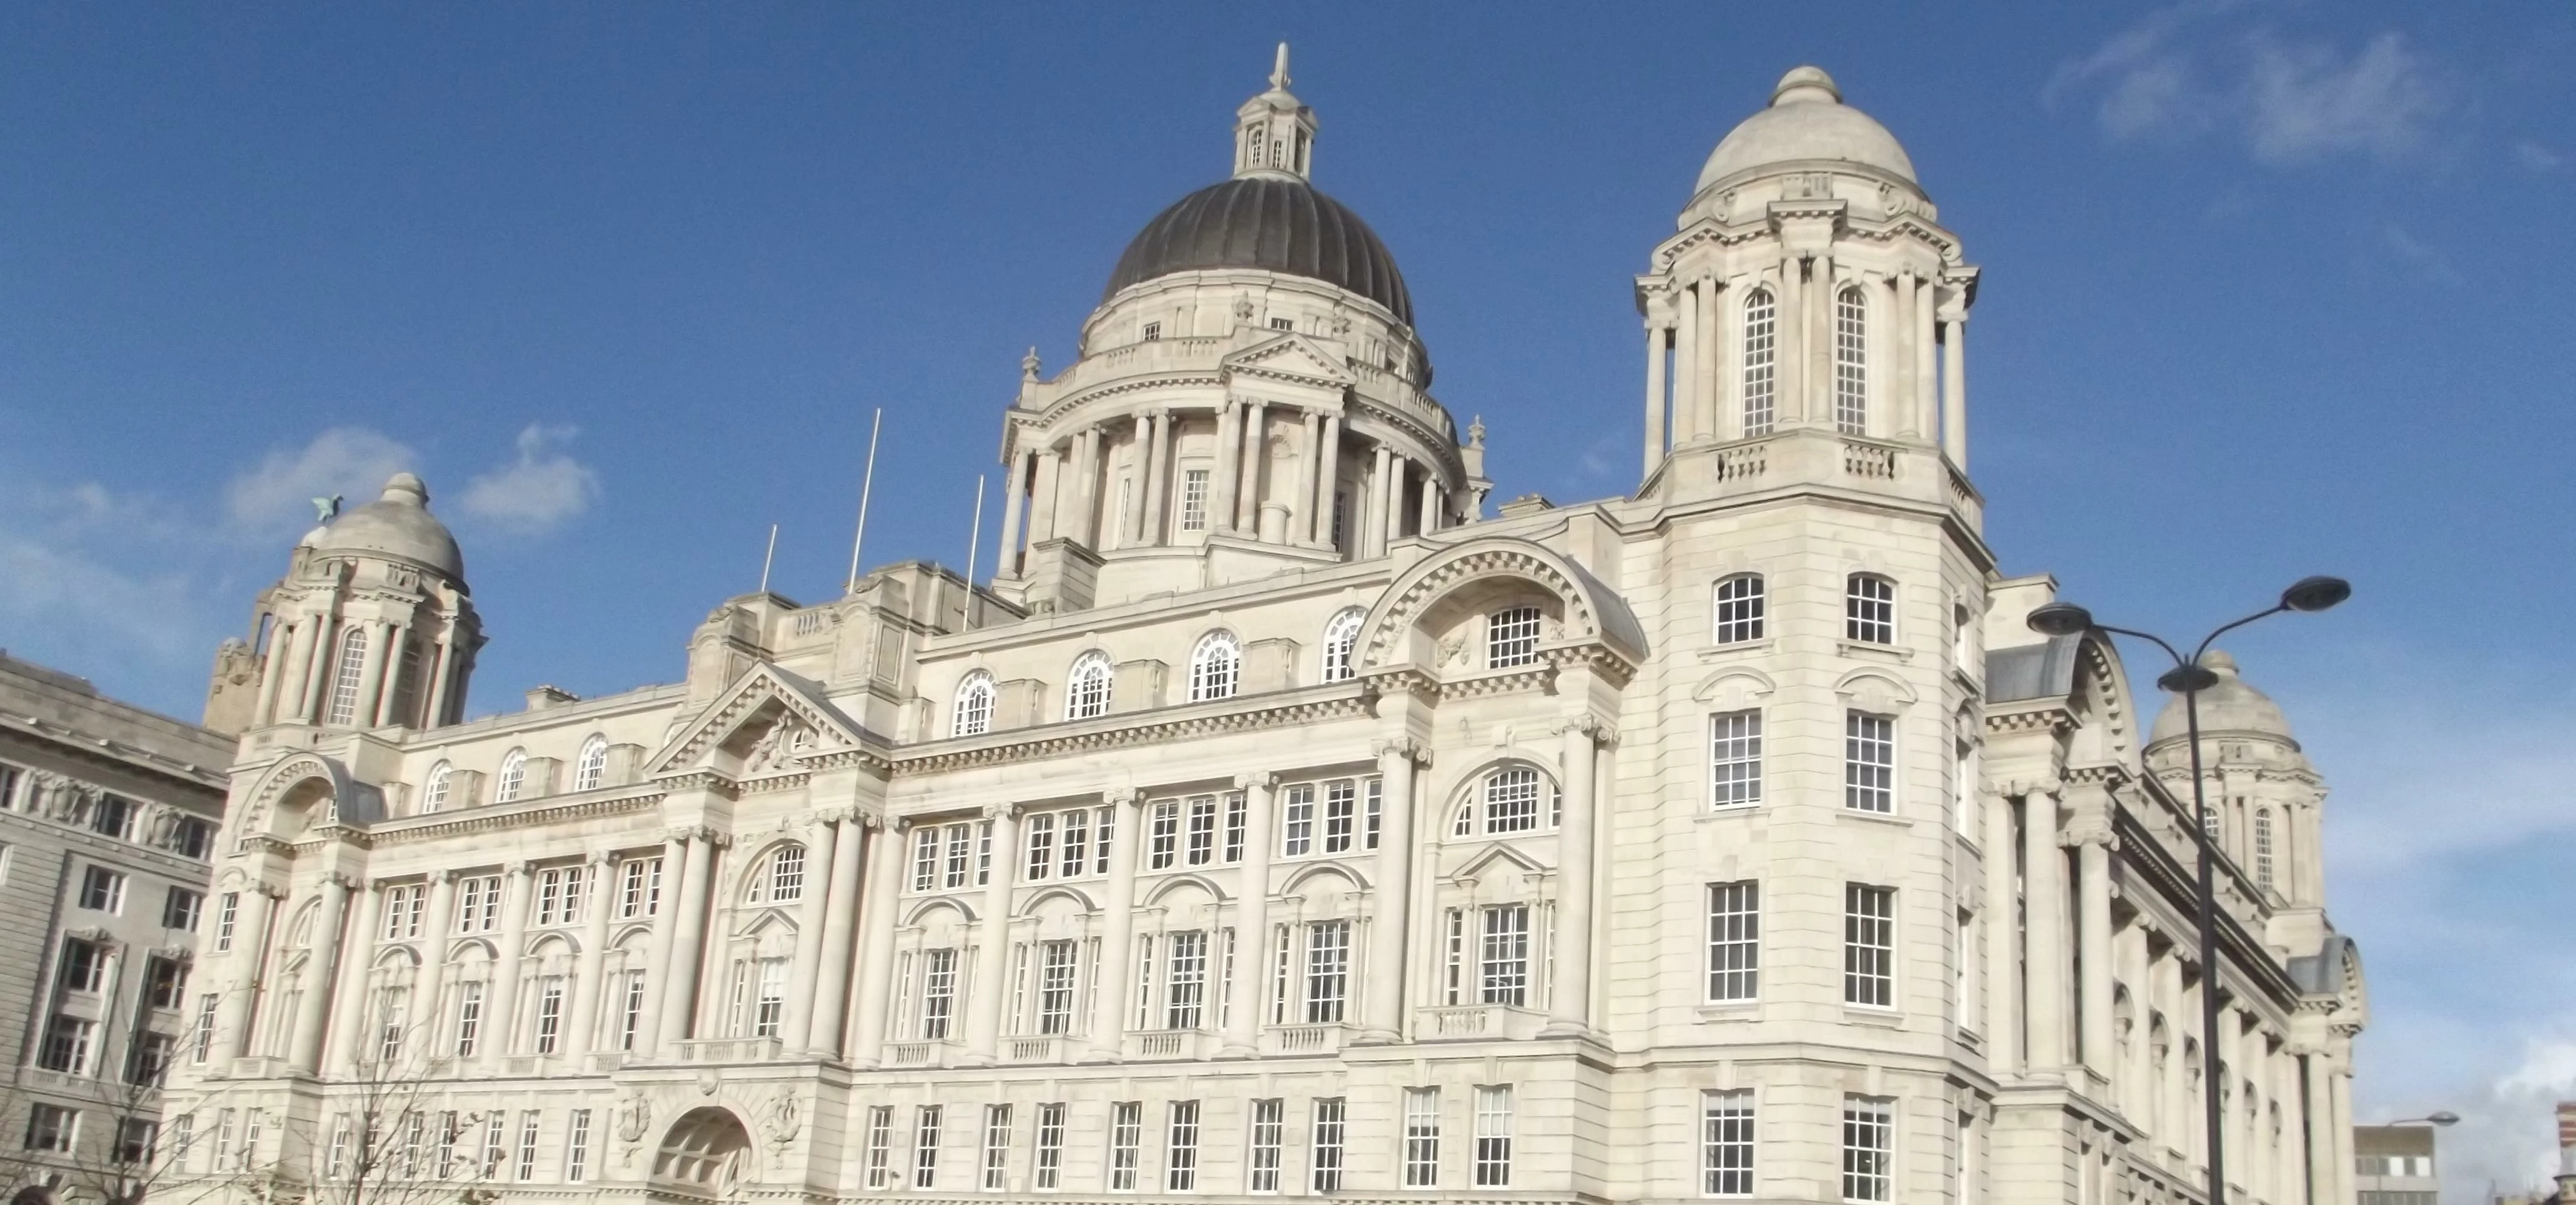 The Three Graces - Liverpool Waterfront - Port of Liverpool Building